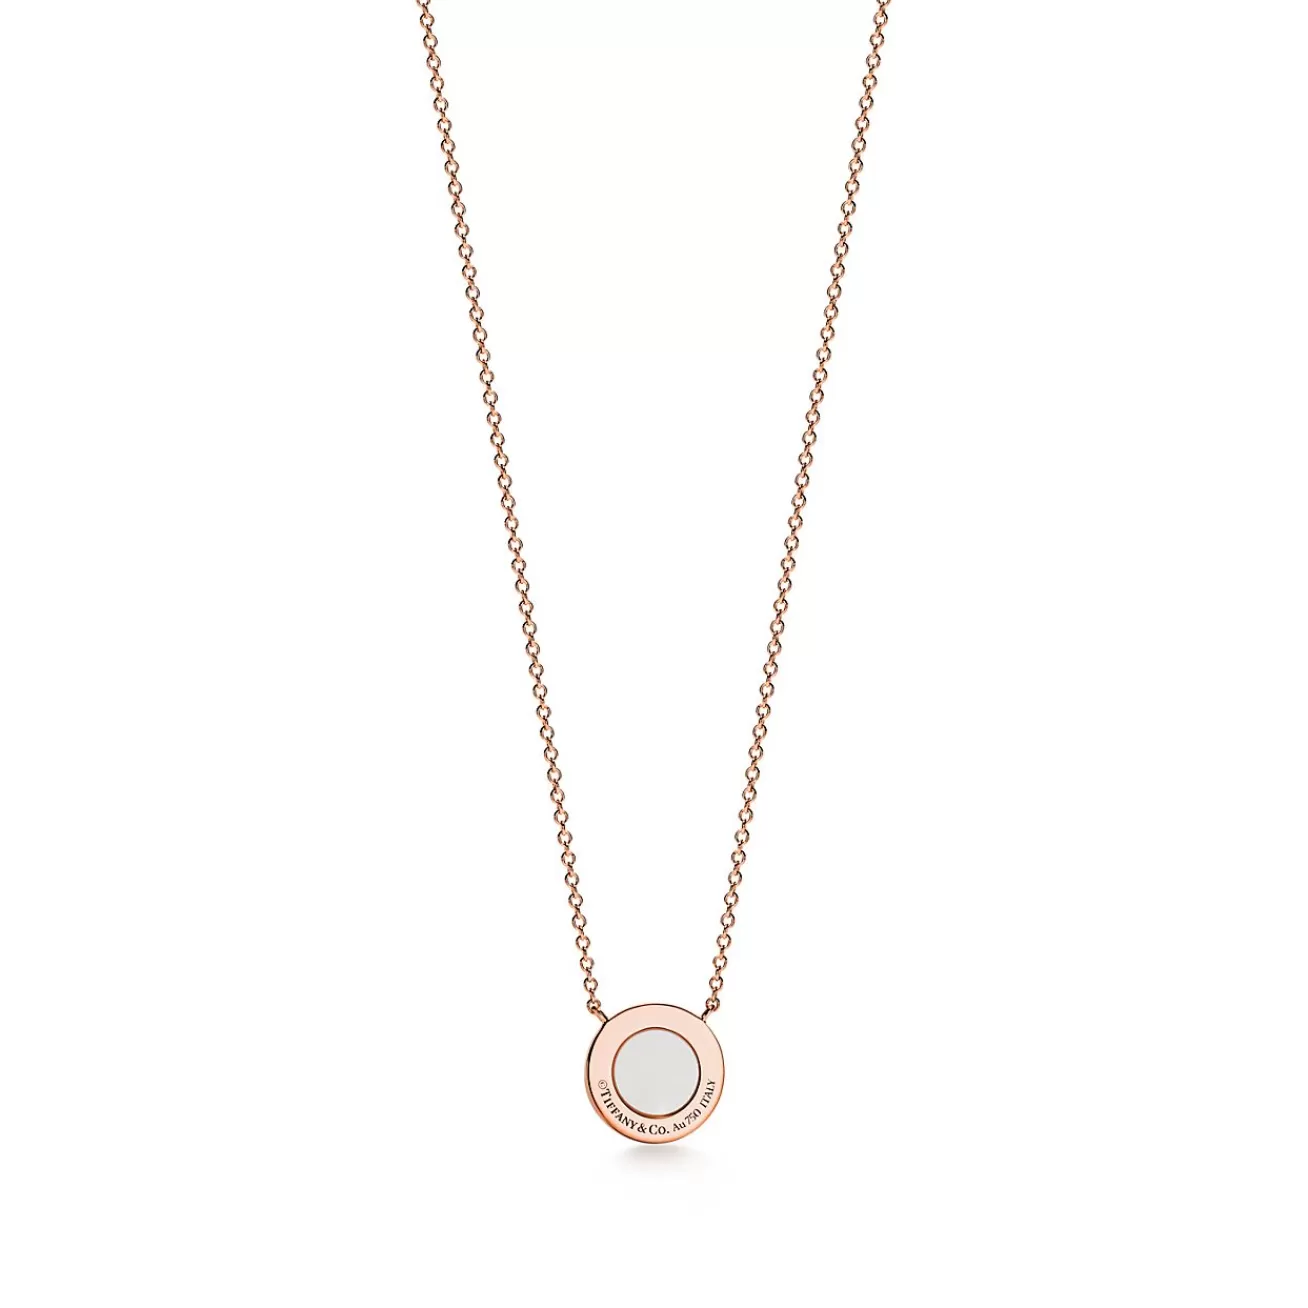 Tiffany & Co. Tiffany T diamond and mother-of-pearl circle pendant in 18k rose gold. | ^ Necklaces & Pendants | Dainty Jewelry